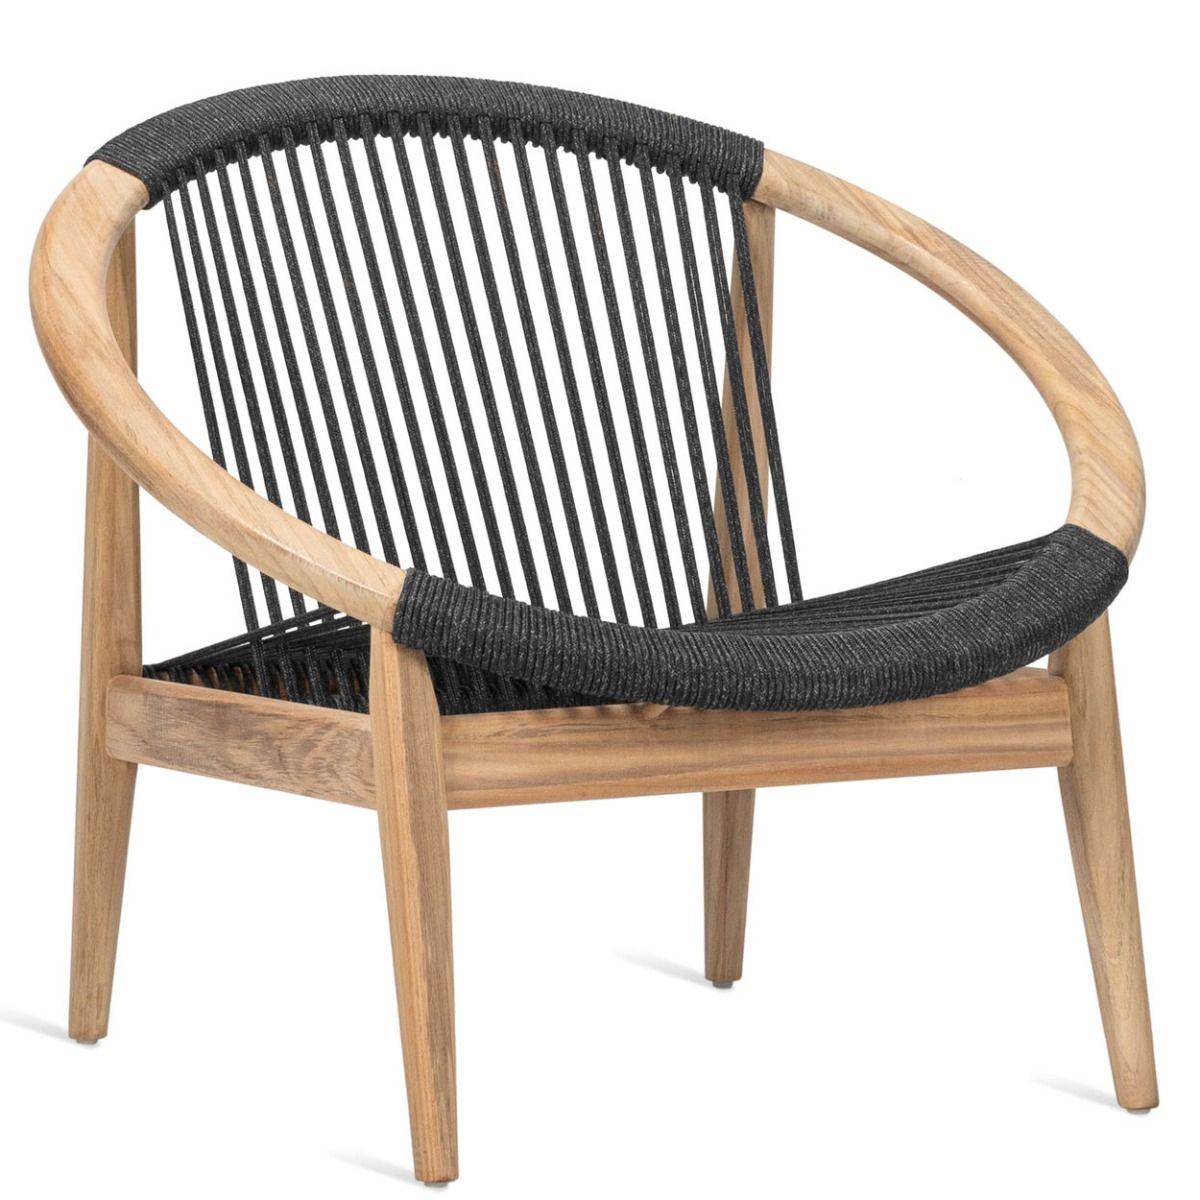 Vincent Sheppard Frida Loungestoel– Outdoor Lounge Chair - Teakhout